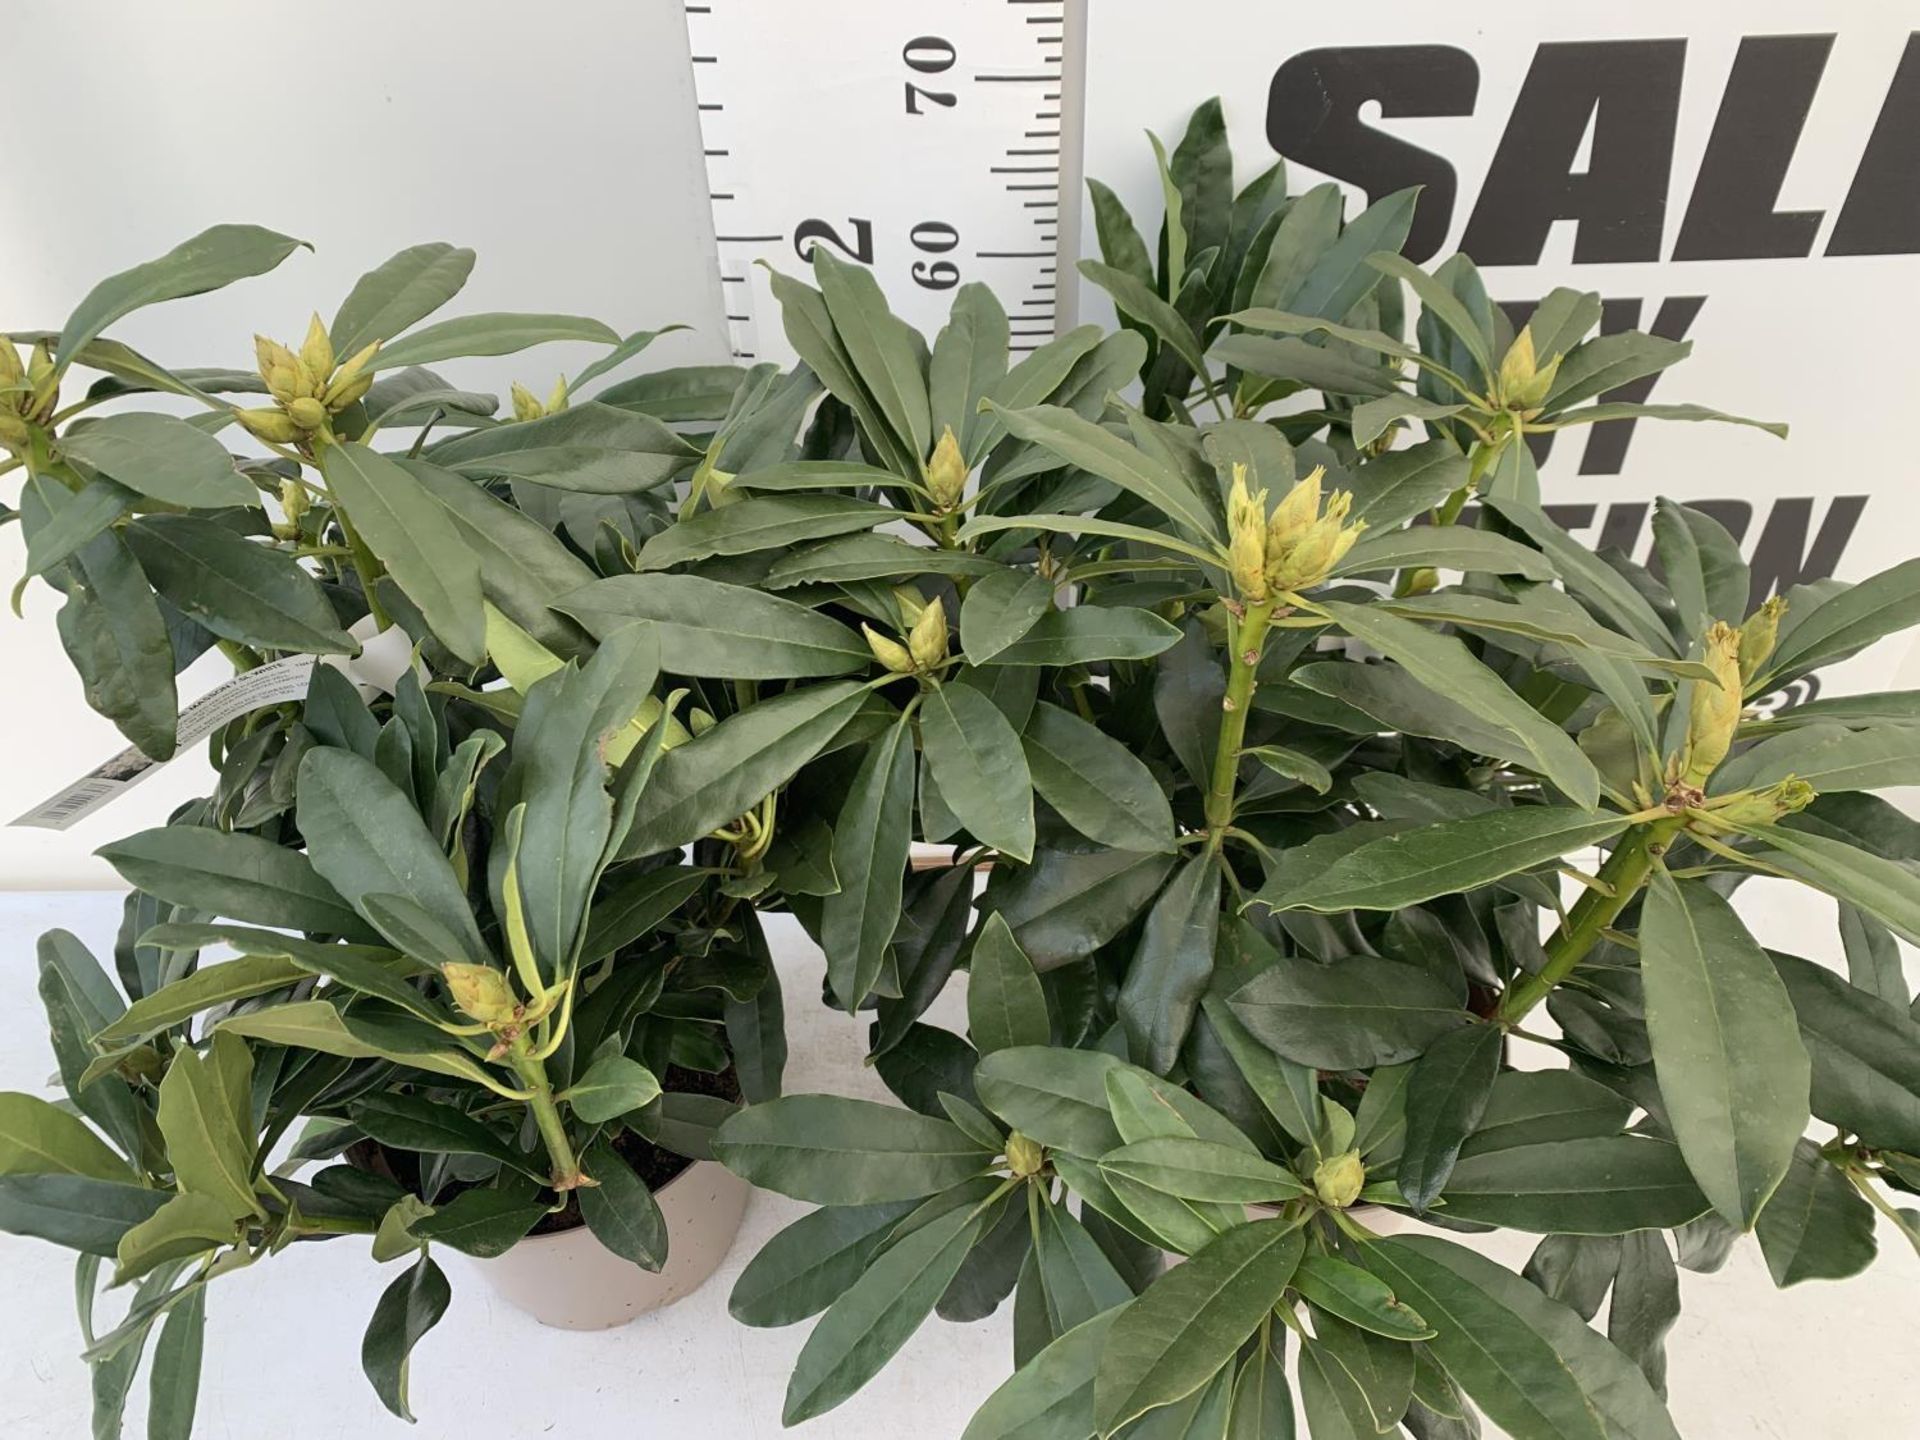 TWO RHODODENDRONS MADAME MASSON WHITE IN 7.5 LTR POTS APPROX 70CM IN HEIGHT PLUS VAT TO BE SOLD - Image 4 of 6